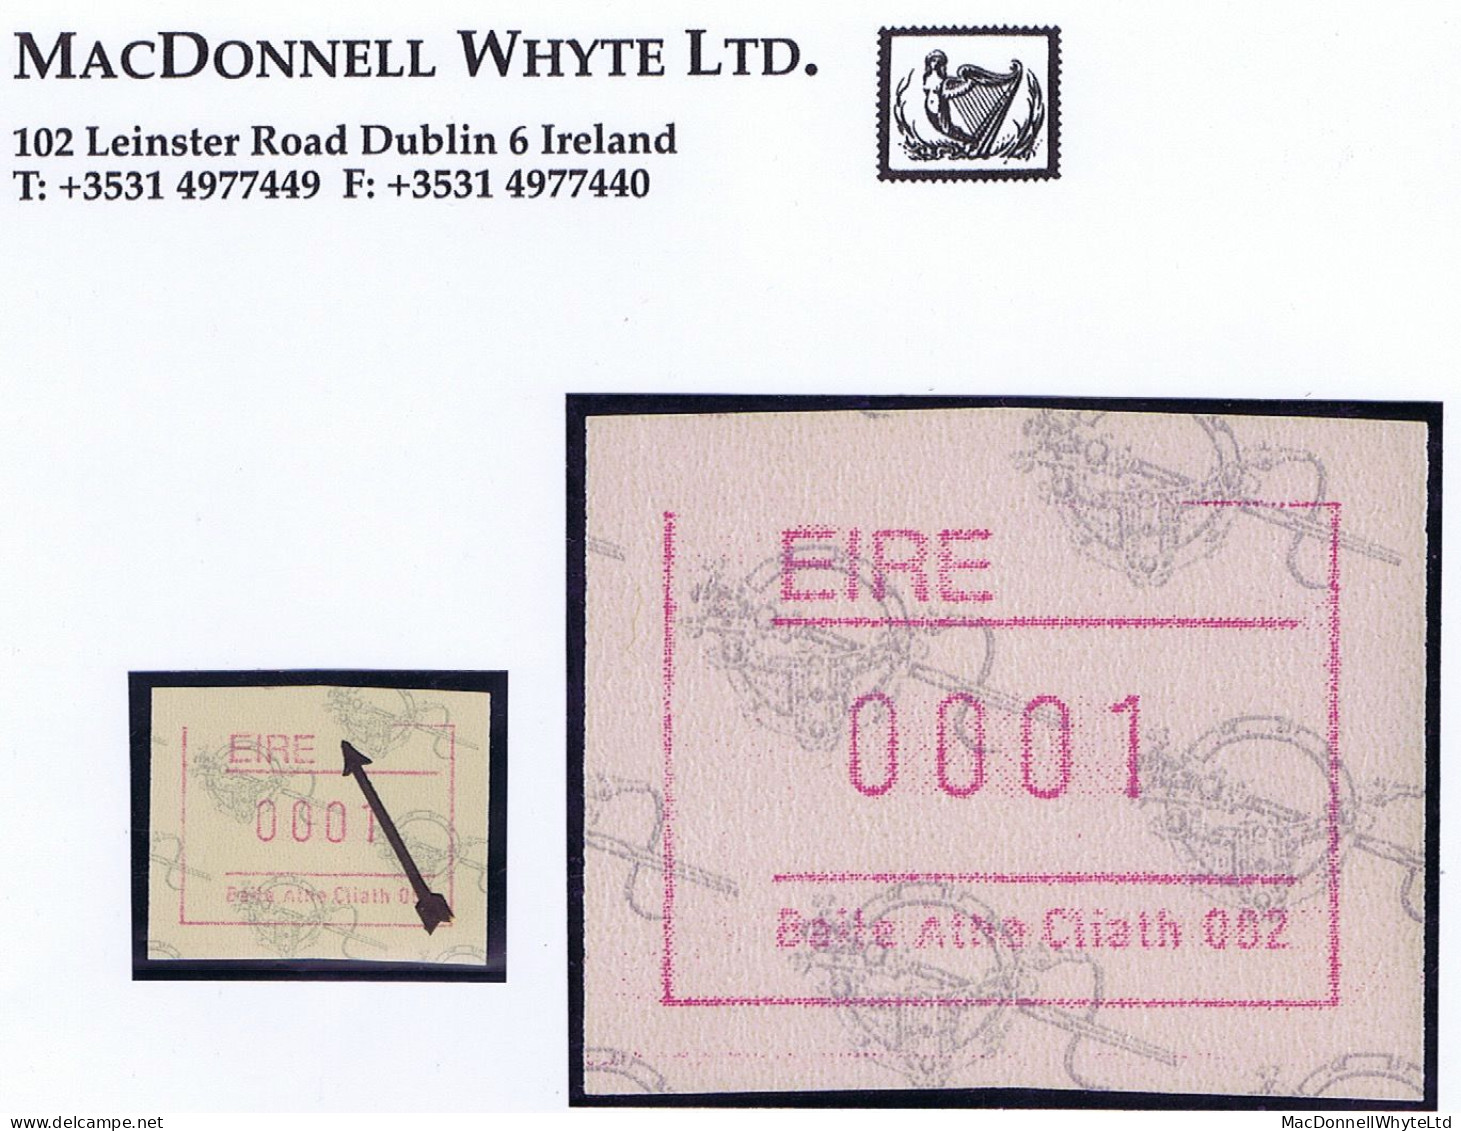 Ireland Dublin 1992 Frama Automatic Postage Labels, Dublin No.2 Machine "top Frameline Mostly Omitted" Mint - Affrancature Meccaniche/Frama